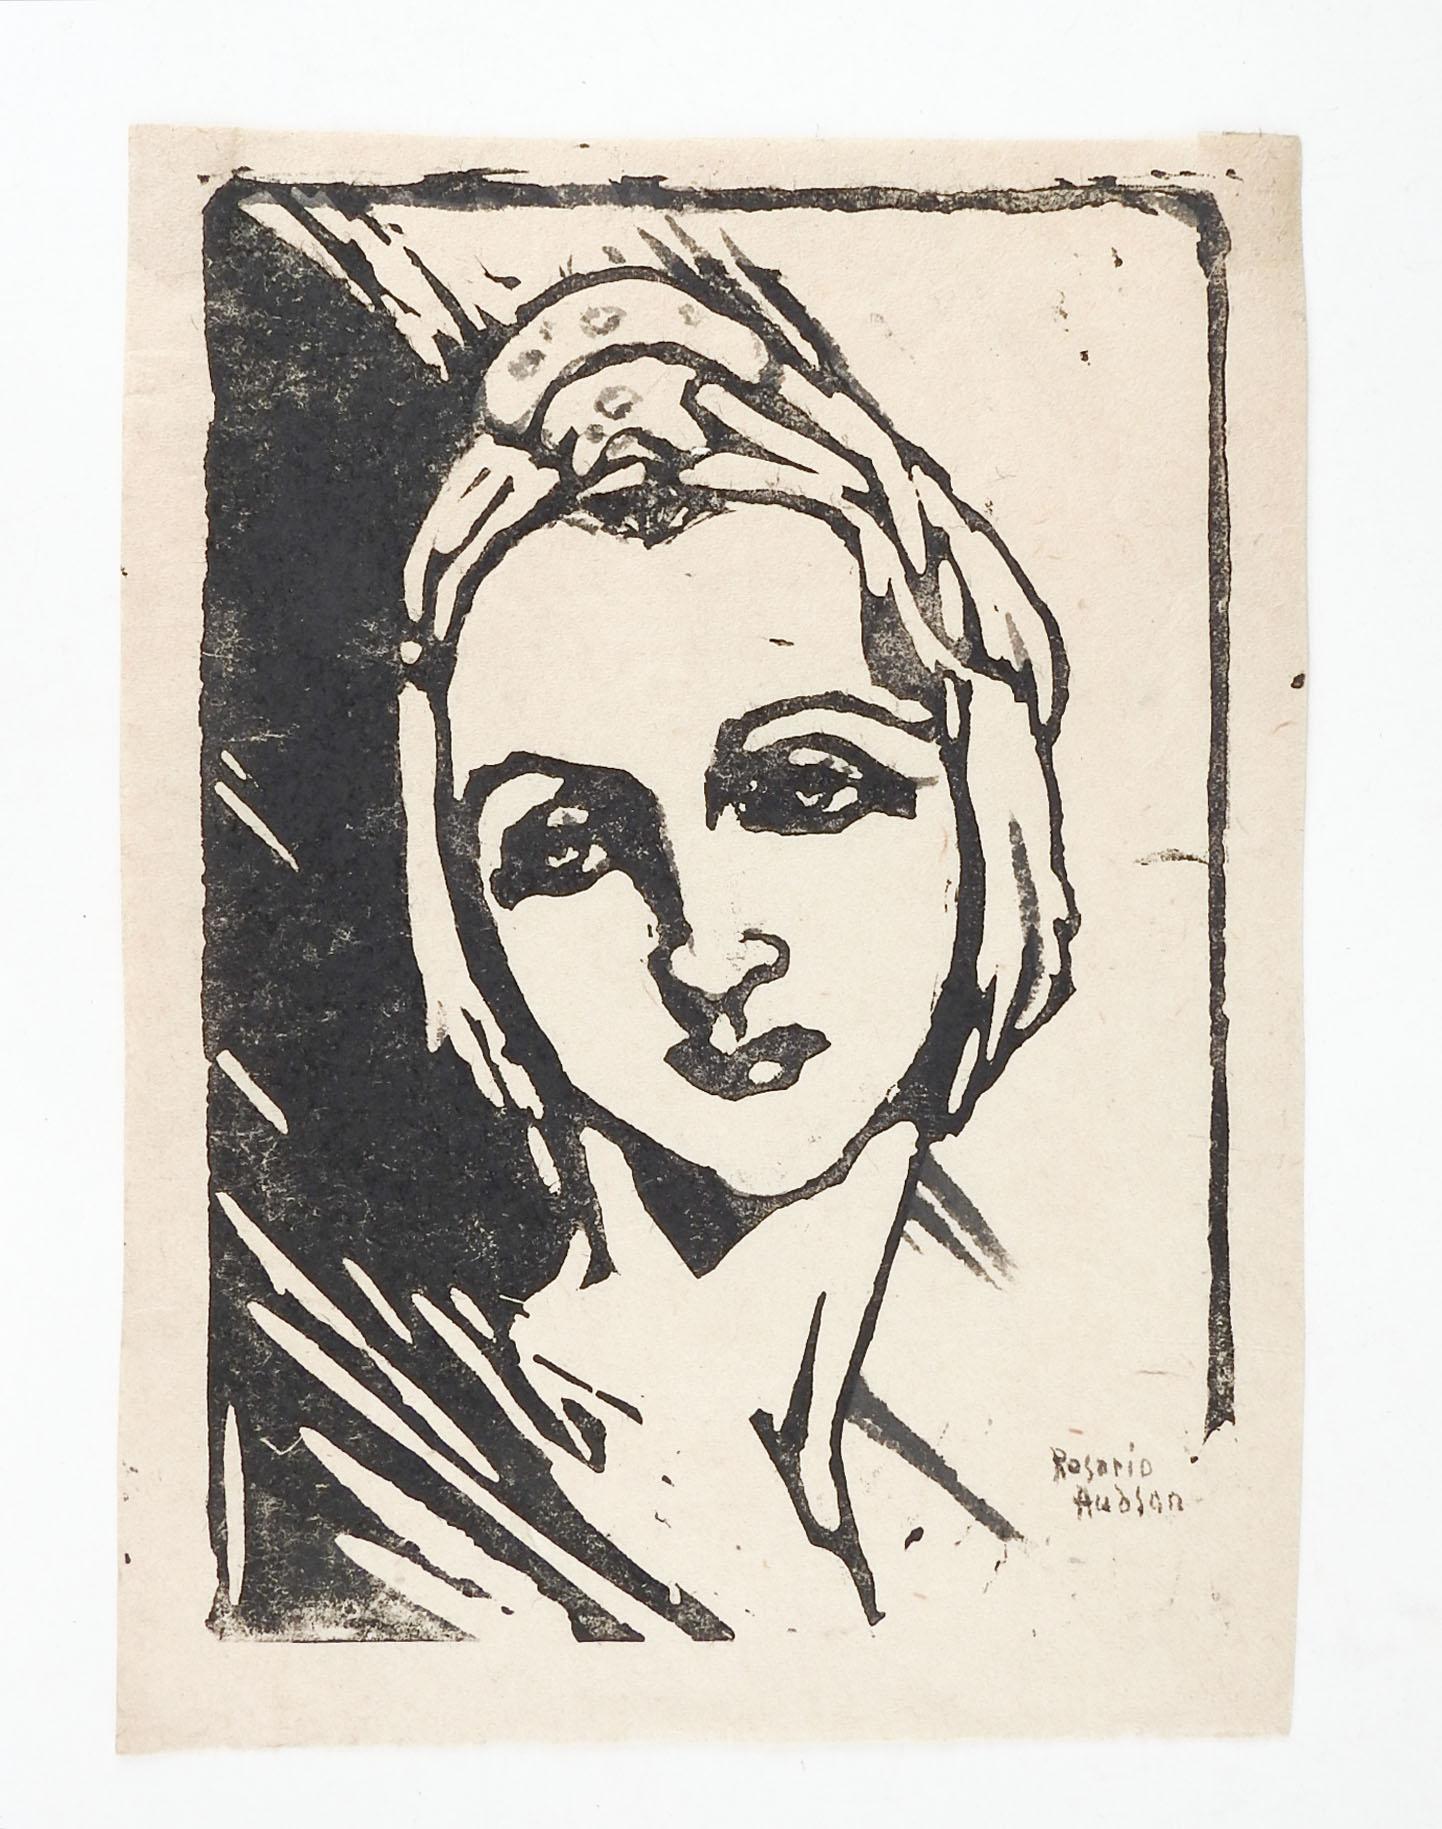 Woodcut on paper portrait of young woman circa 1930's. Signed Rosario Hudson lower right corner. Unframed, age toning.